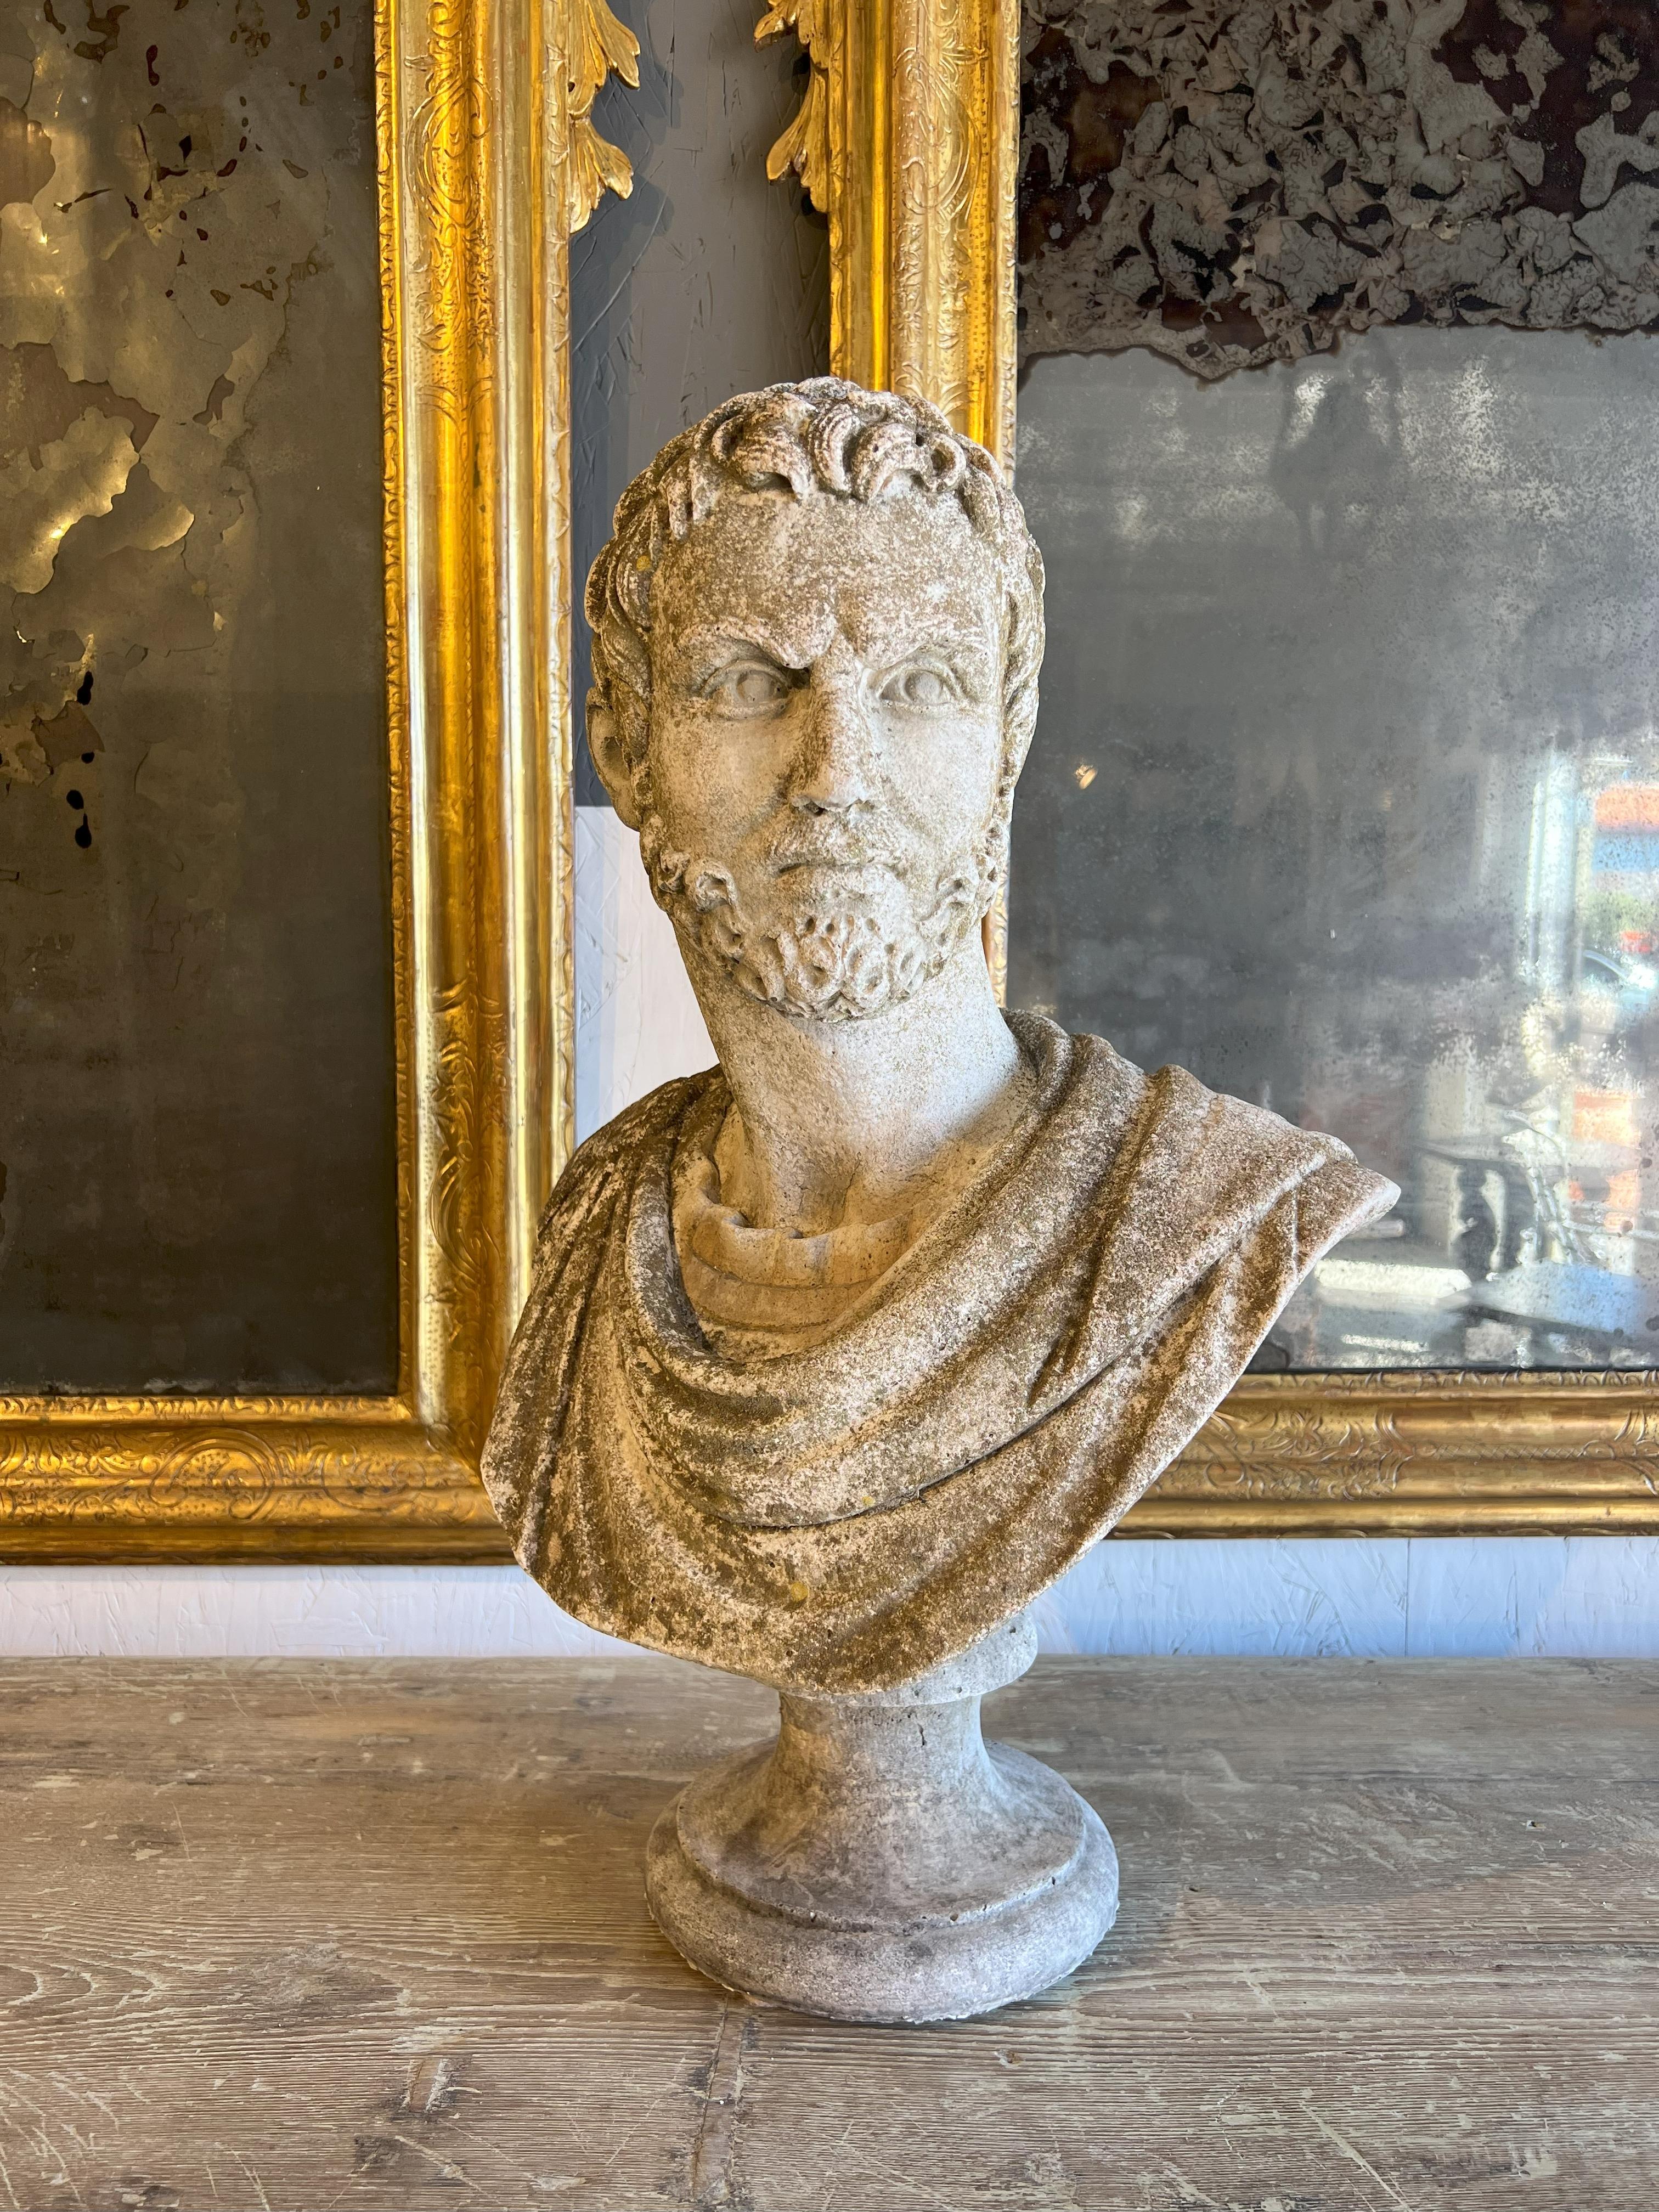 This late 19th century carved stone bust made of 